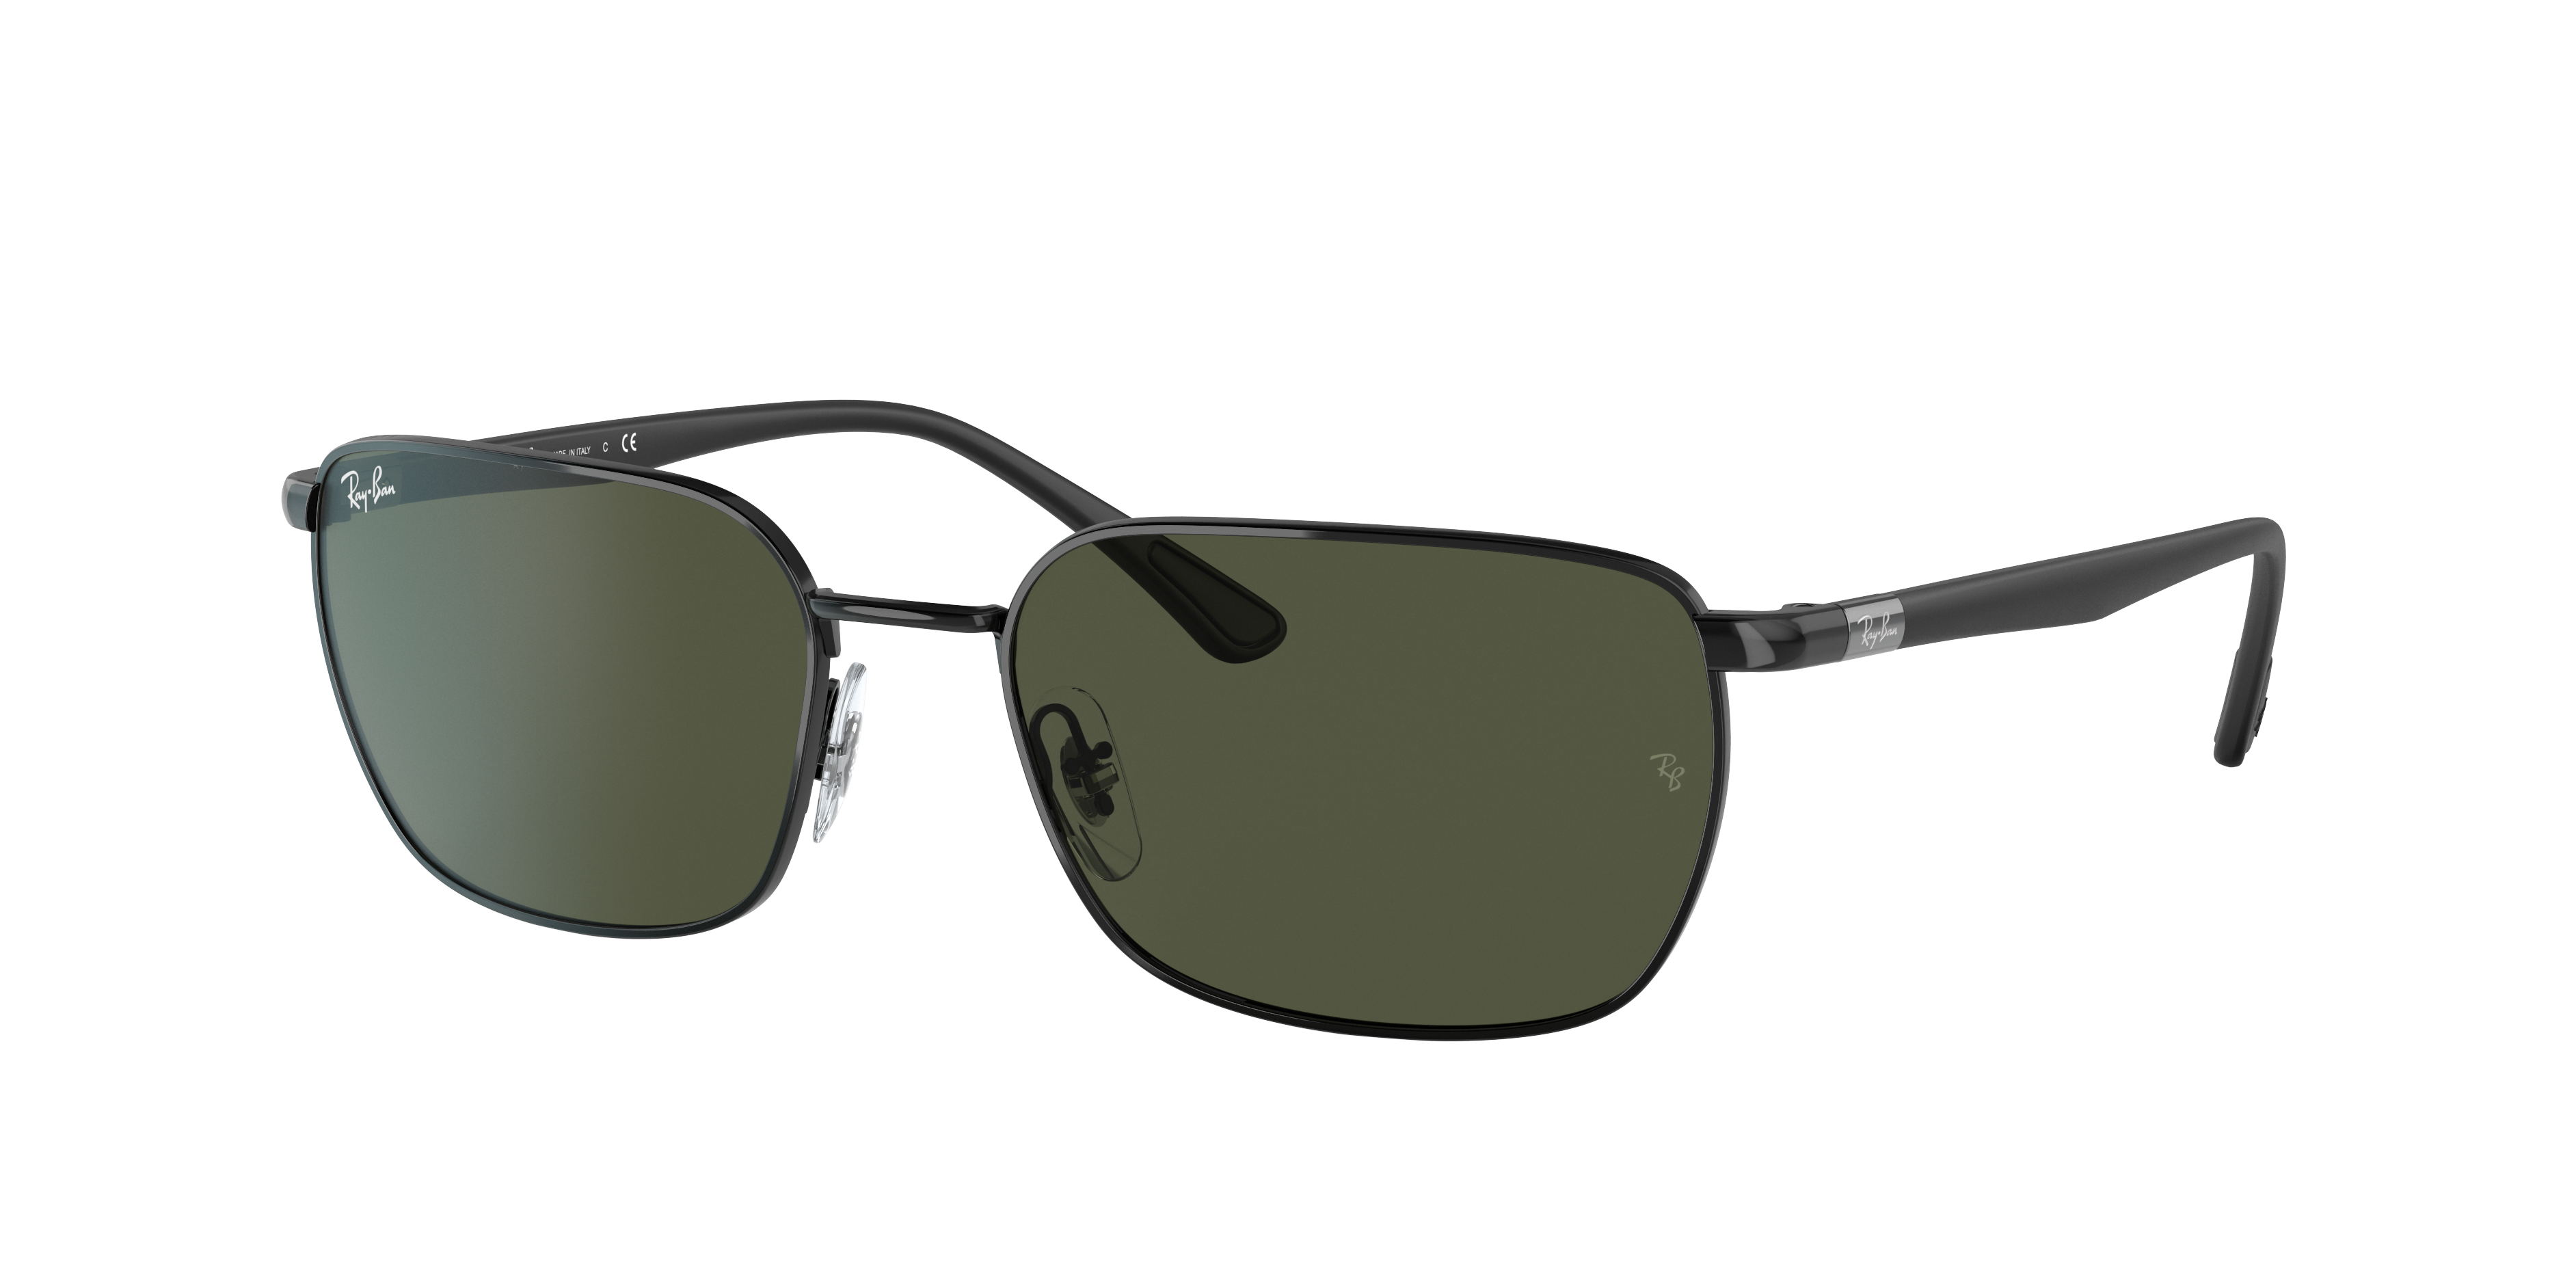 Check out the Rb3684 at ray-ban.com